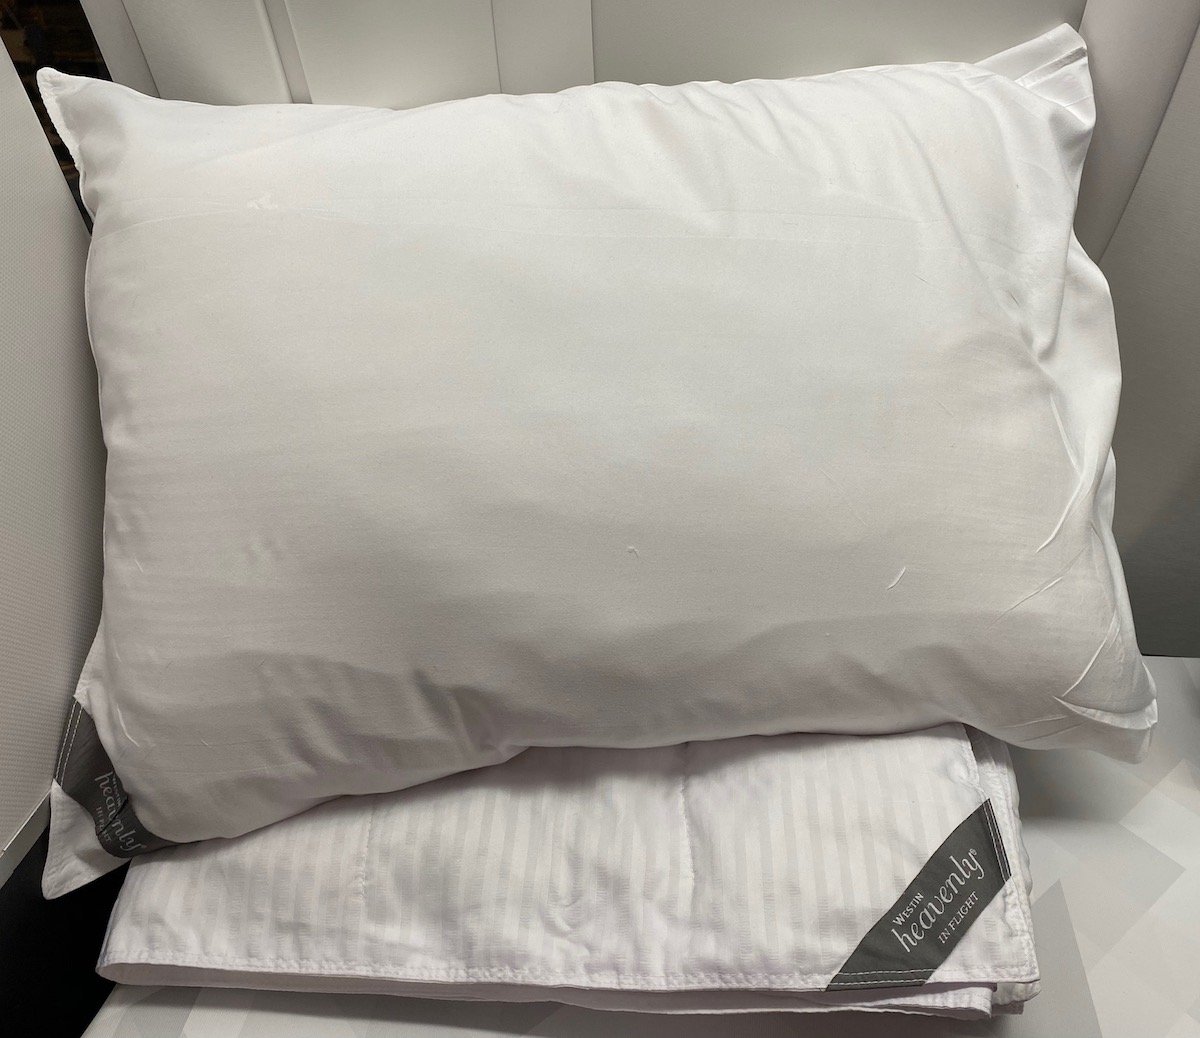 Delta One Suite A330-900neo Review I One Mile At A Time